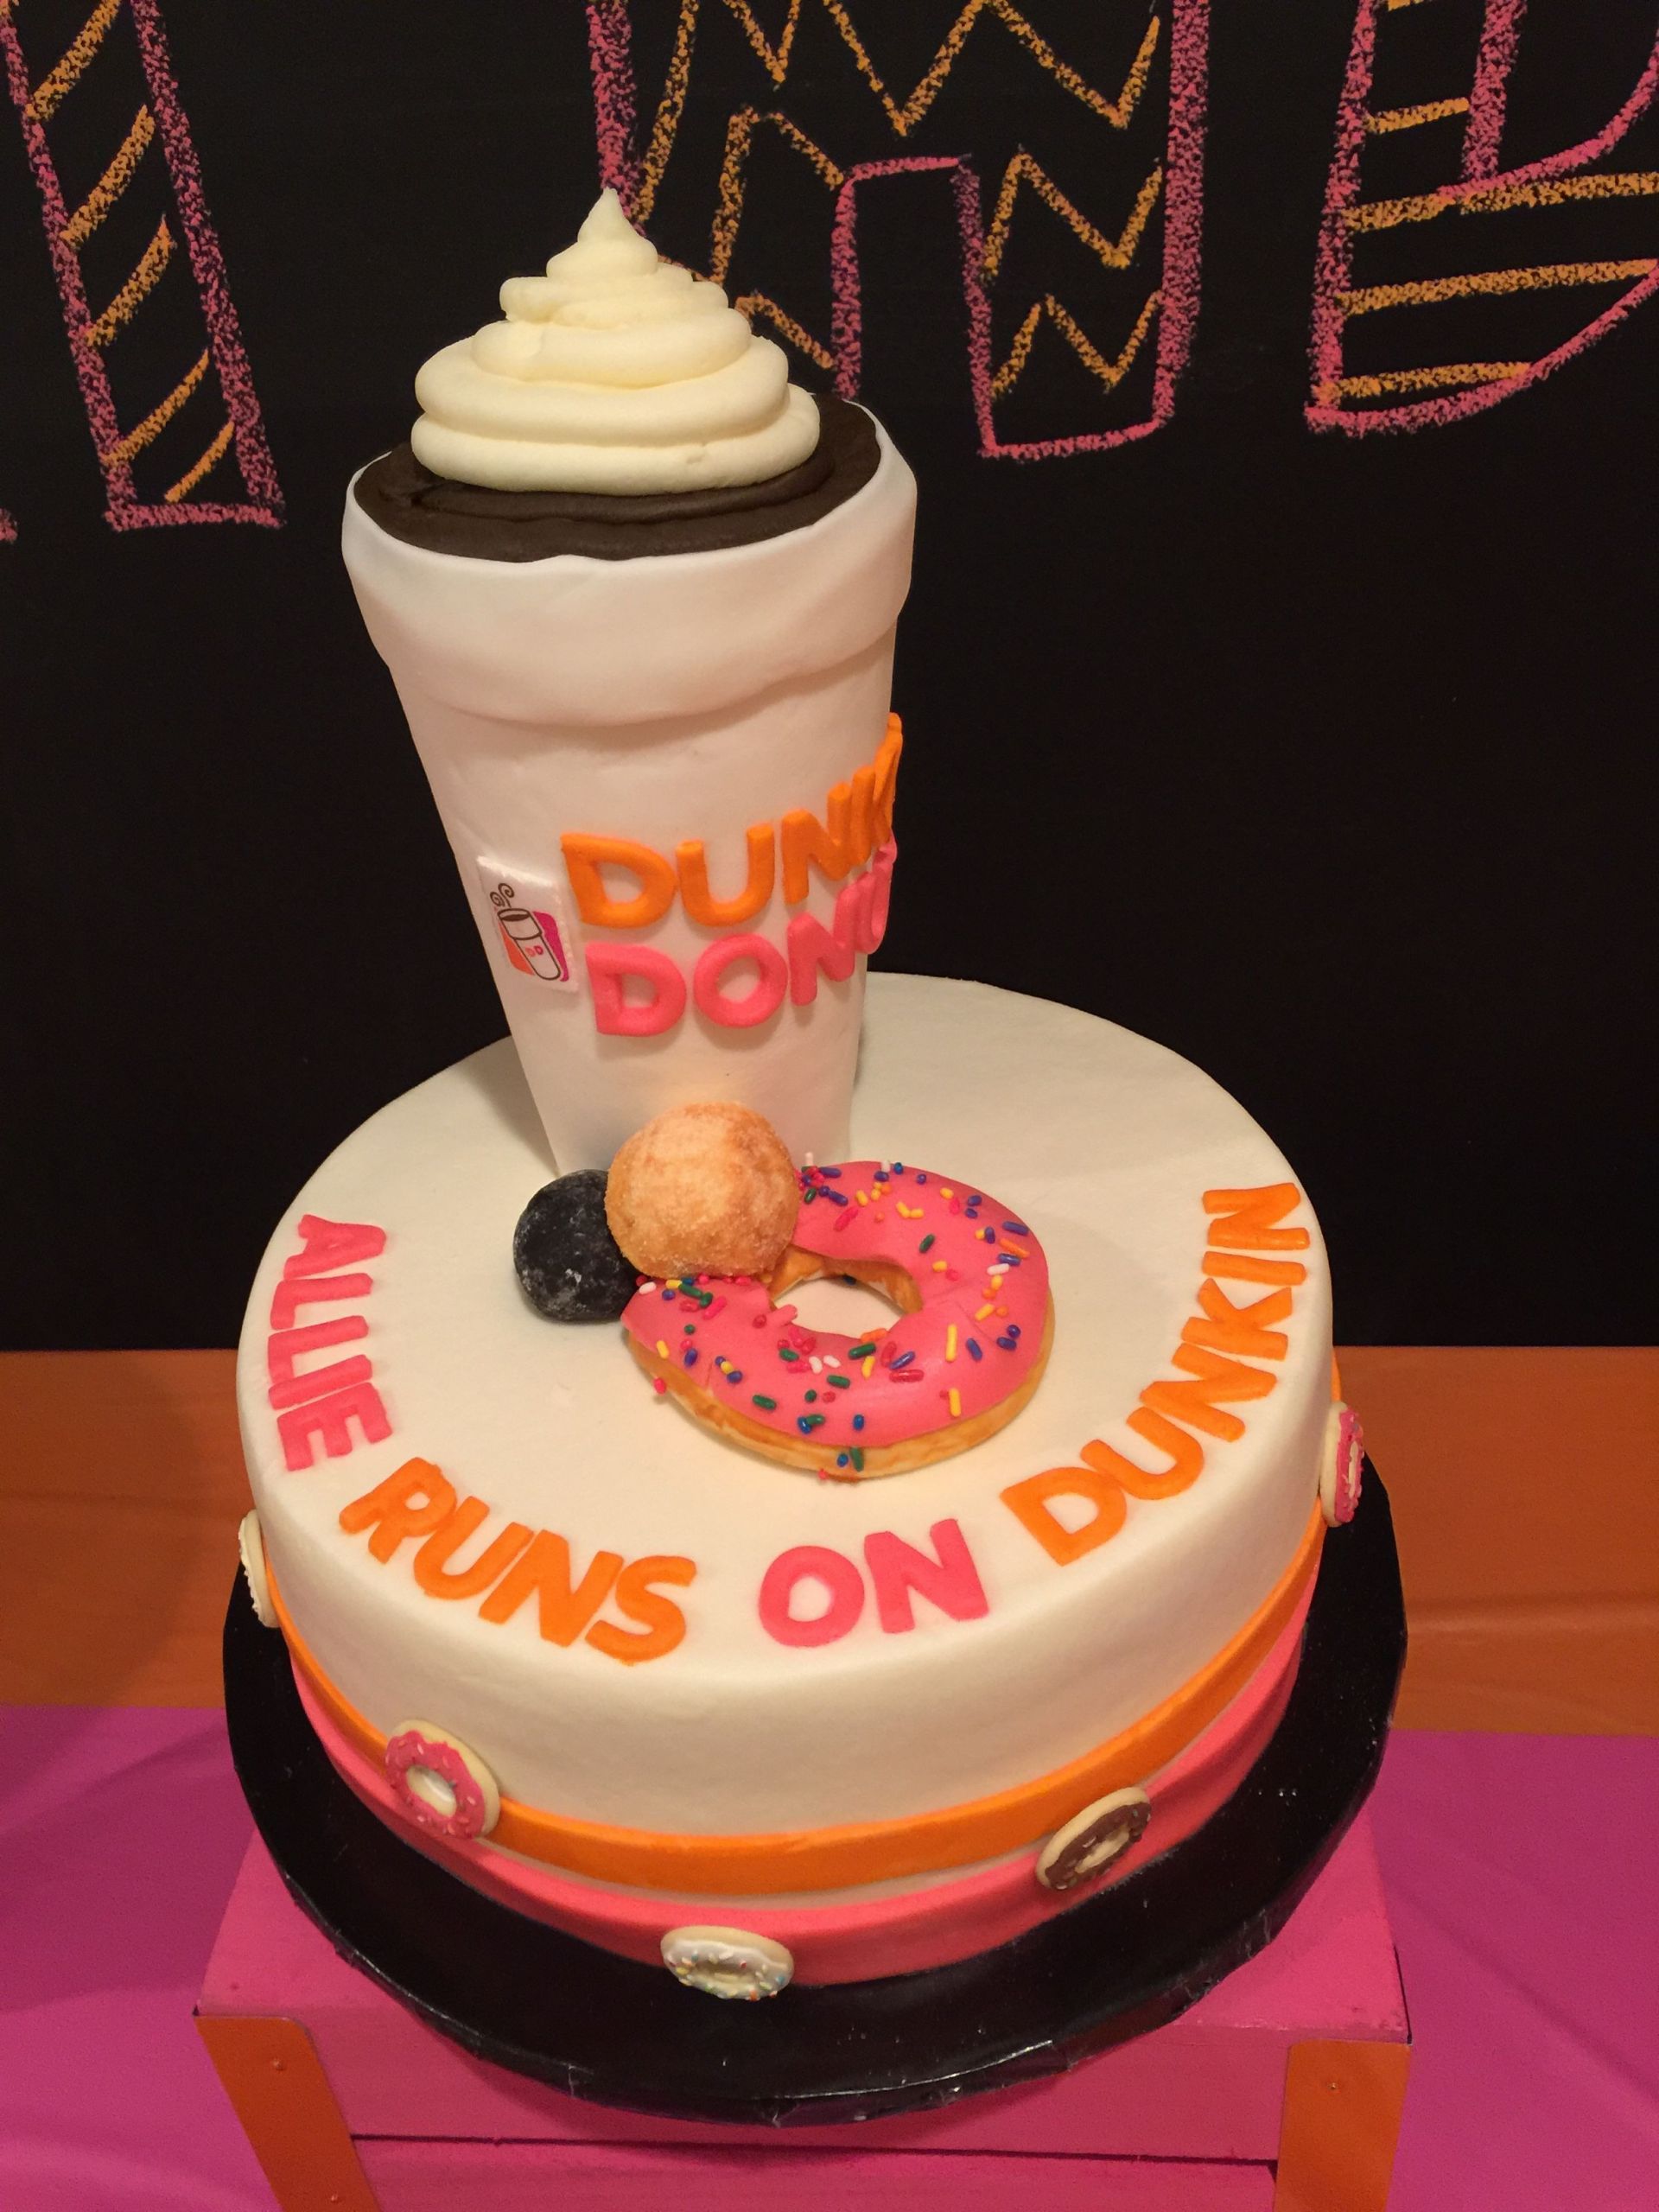 The Best Dunkin Donuts Birthday Cake Home, Family, Style and Art Ideas